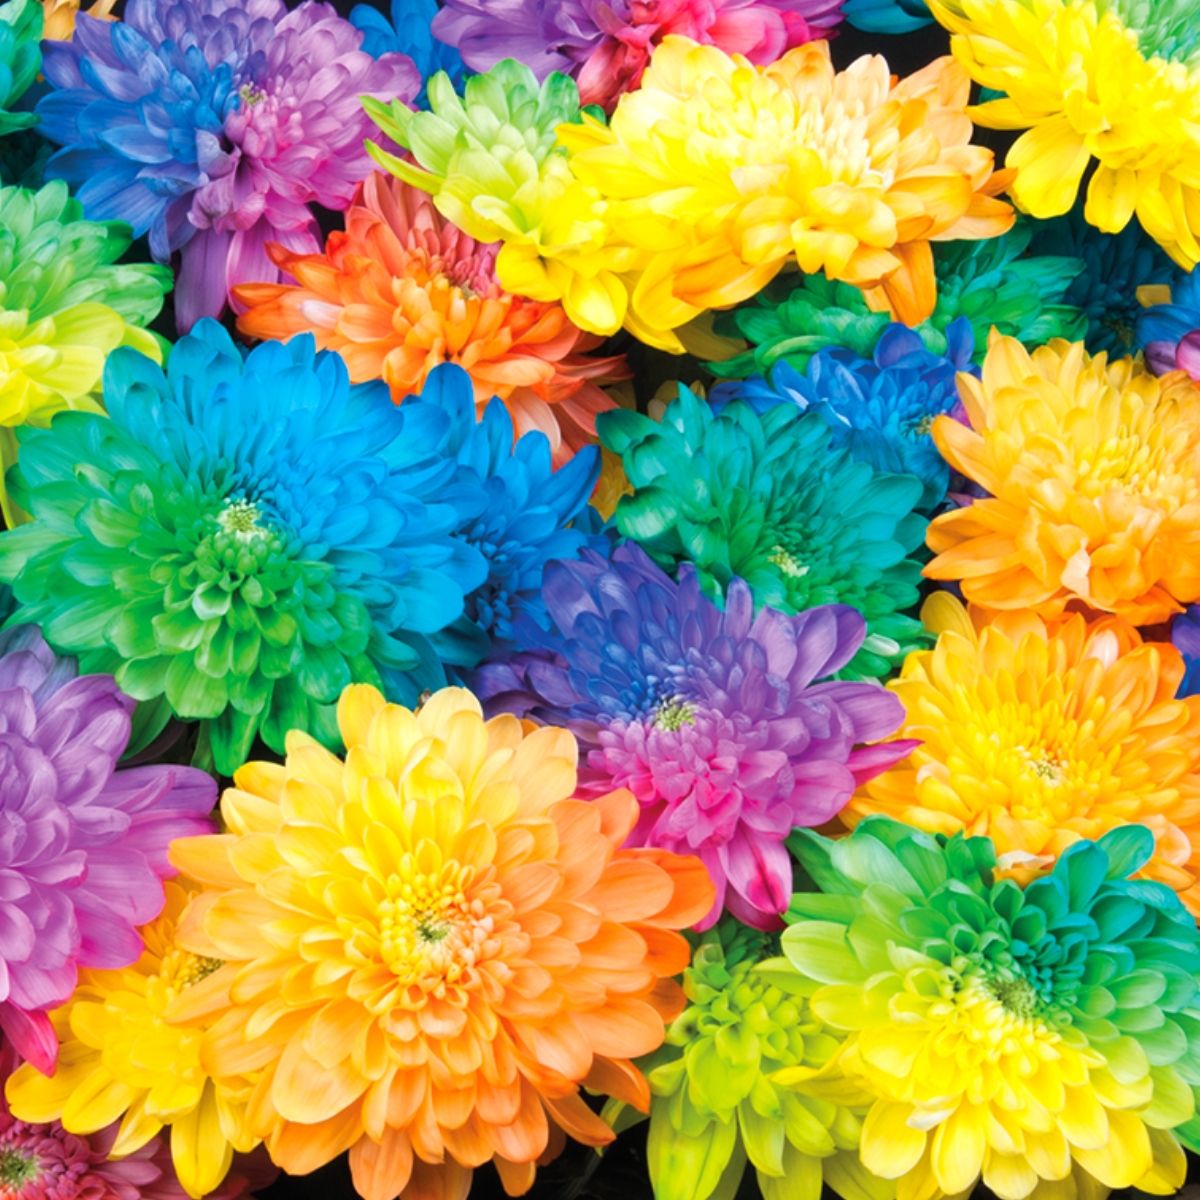 Peter Vrouwe - A plea for colored flowers - Rainbow Chrysanthemums - on Thursd HIghlight (1)